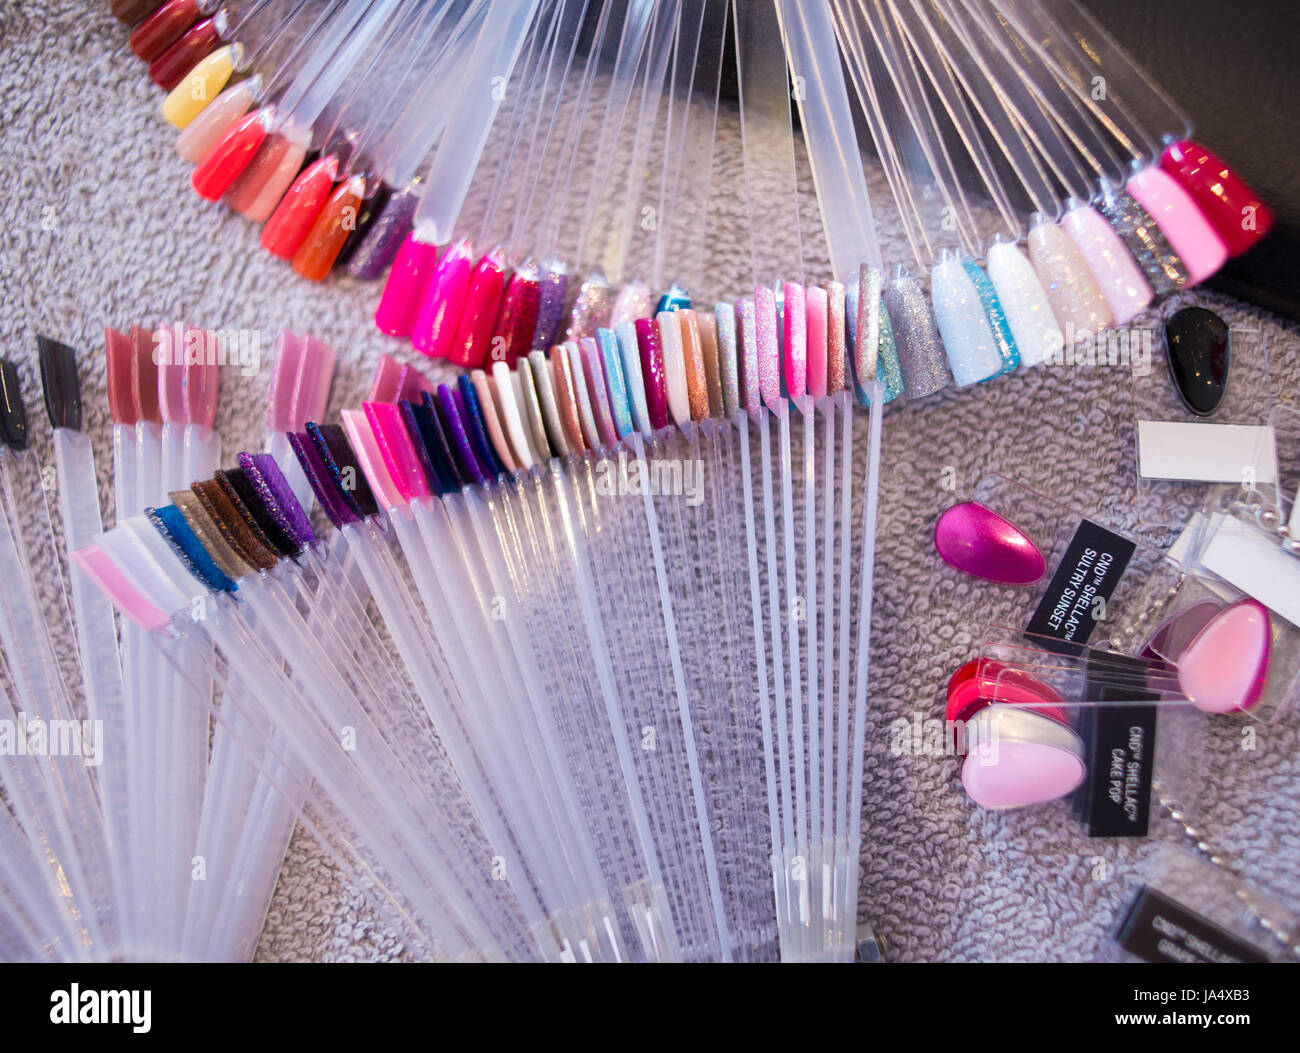 Colourful selection of nail polish colour options on display in a nail salon. Stock Photo